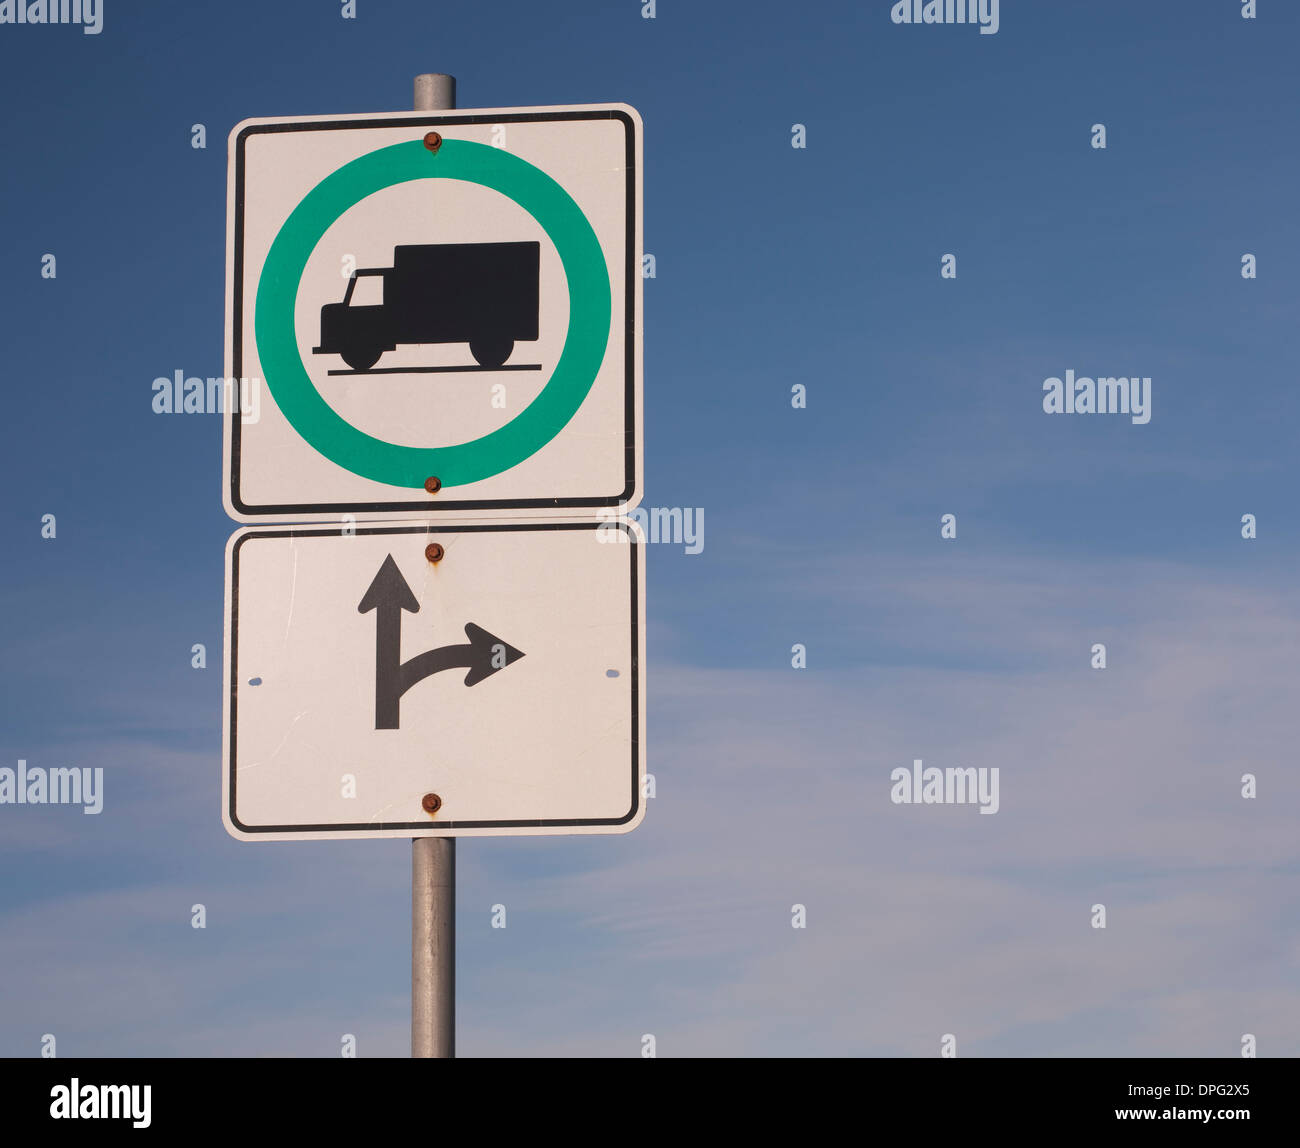 Truck route sign Stock Photo